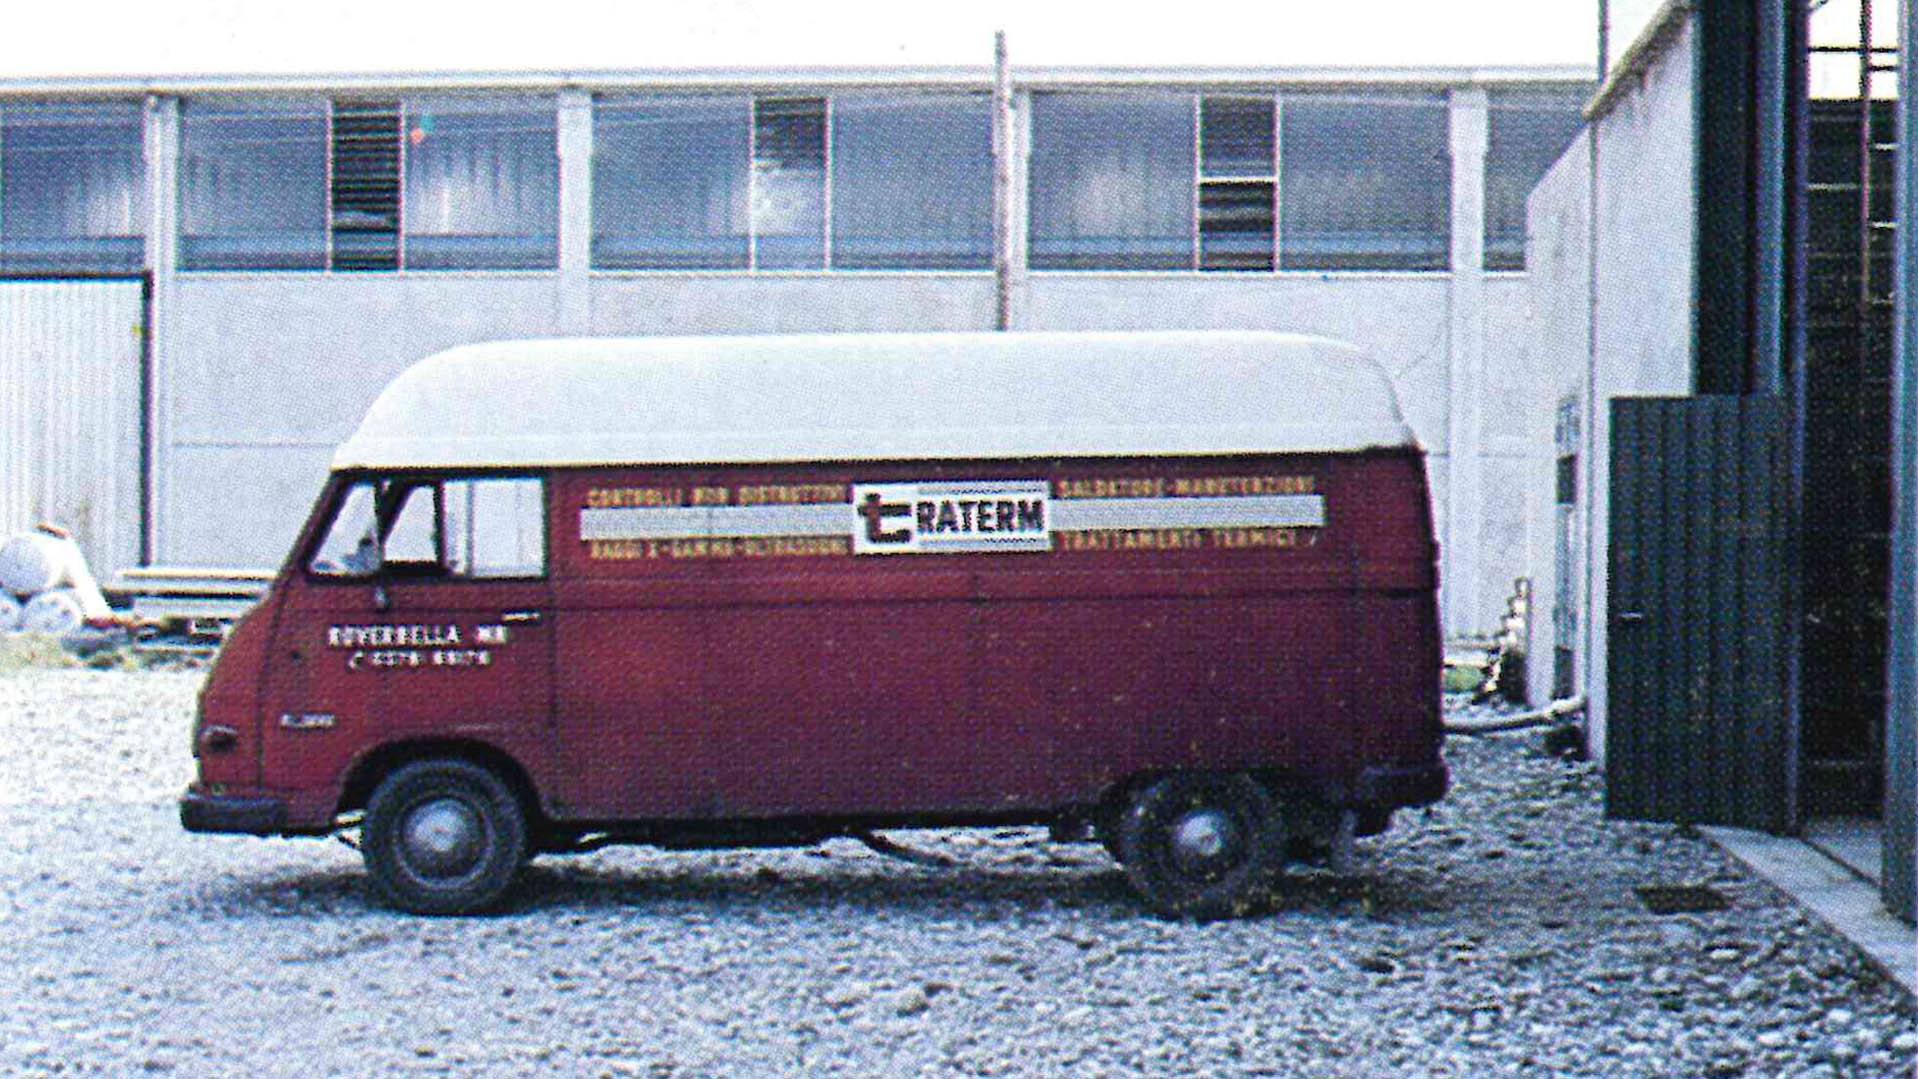 Camioncino Traterm